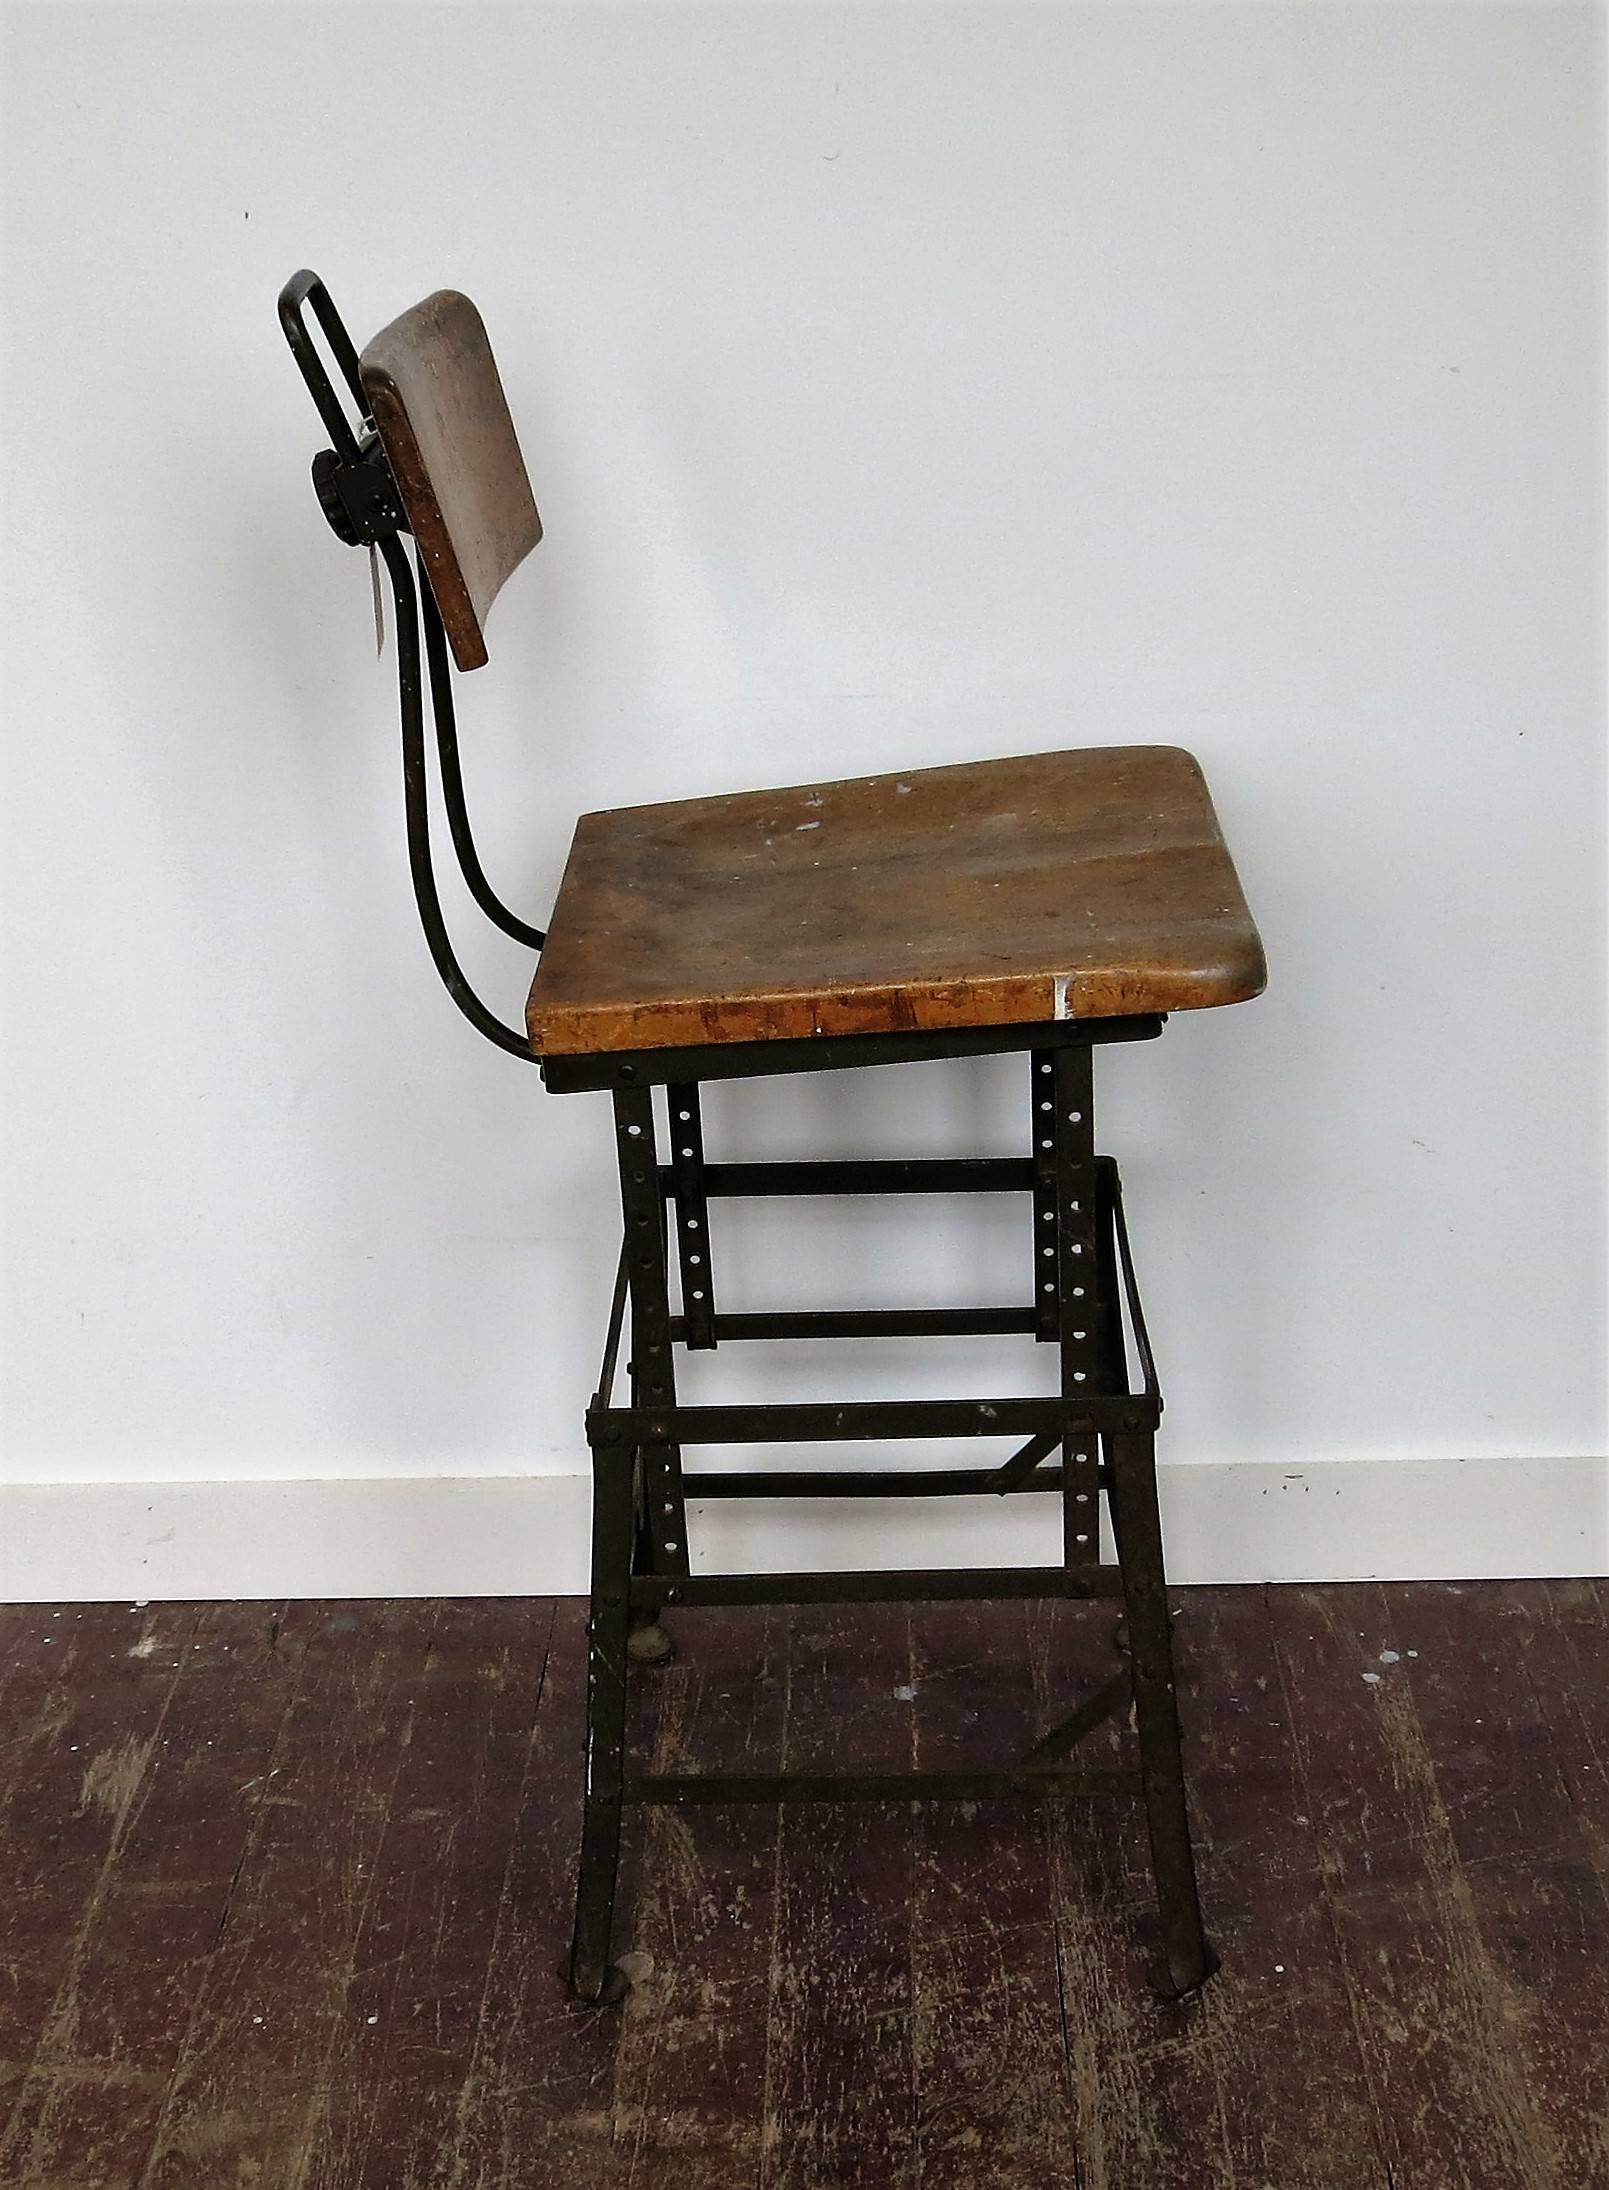 Great 1920s factory stool. Measure: The seat height is 25